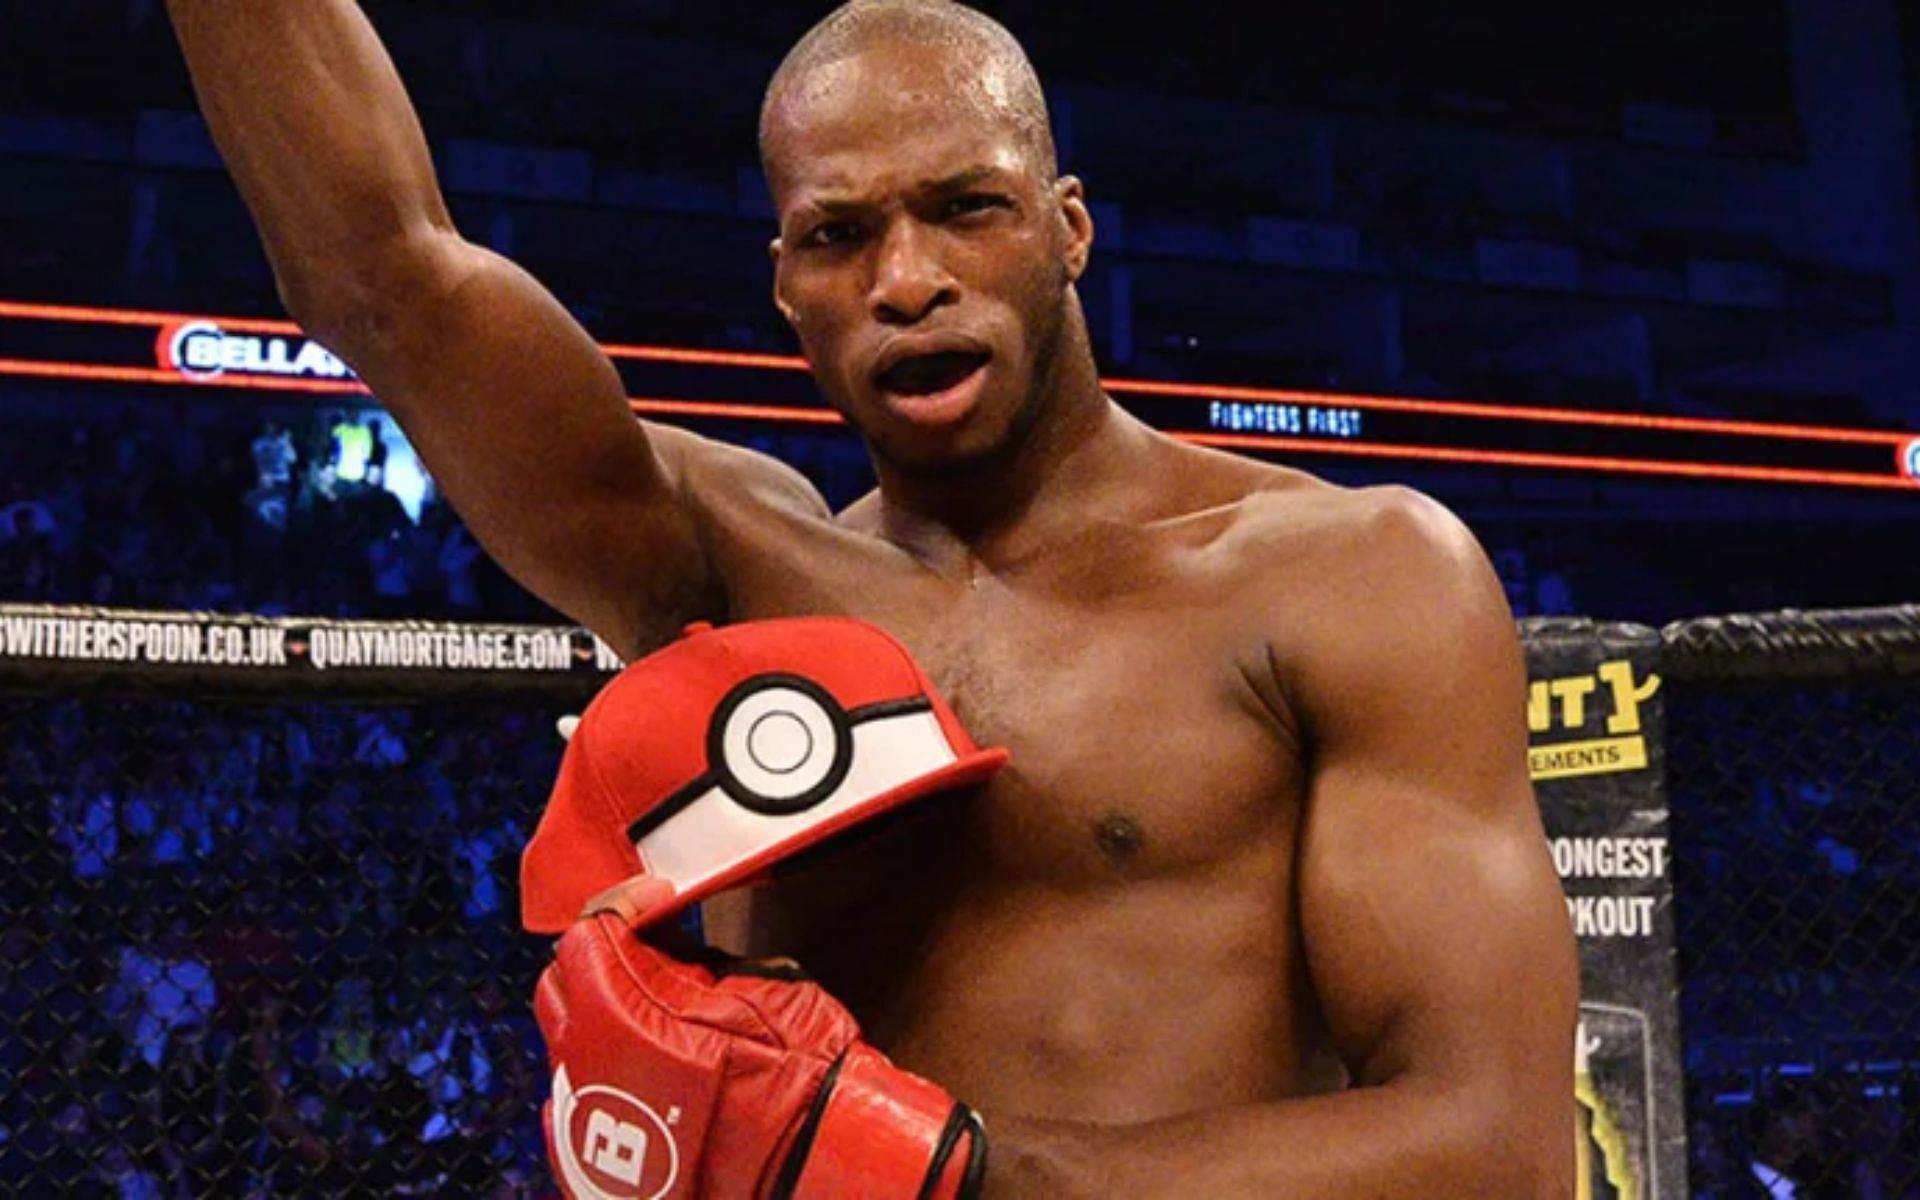 Michael Page after his win at Bellator 158 [Image courtesy @pokemonblog.com]